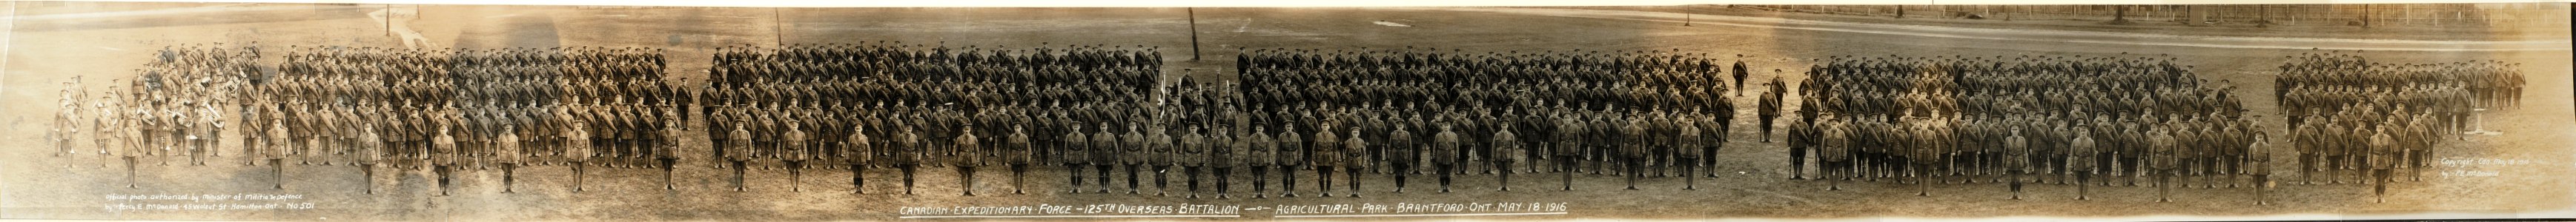 Canadian Expeditionary Force, 125th Overseas Battalion, Agricultural Park, Brantford, Ontario, May 18, 1916. No. 501 (HS85-10-32549) photo